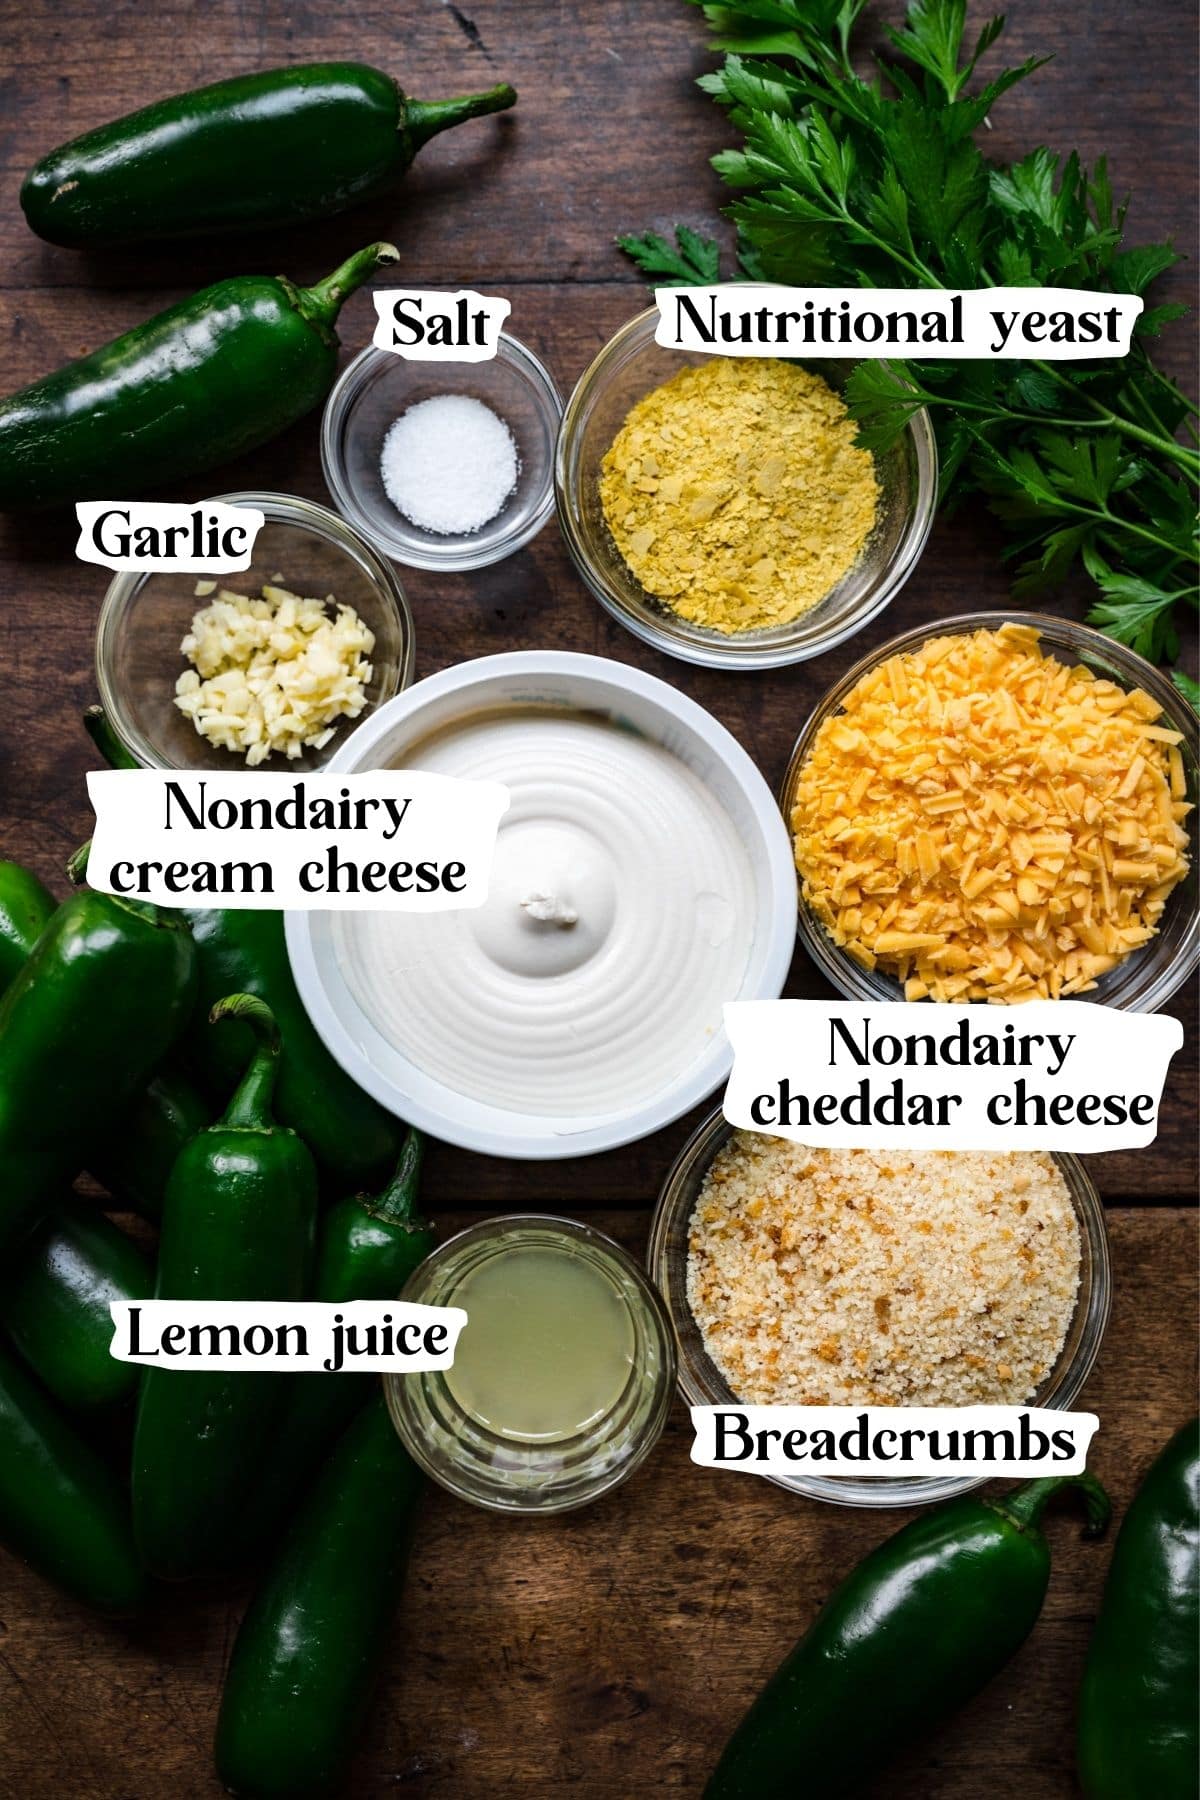 Overhead shot of jalapeno popper ingredients, including nondairy cream cheese, nutritional yeast, and salt.